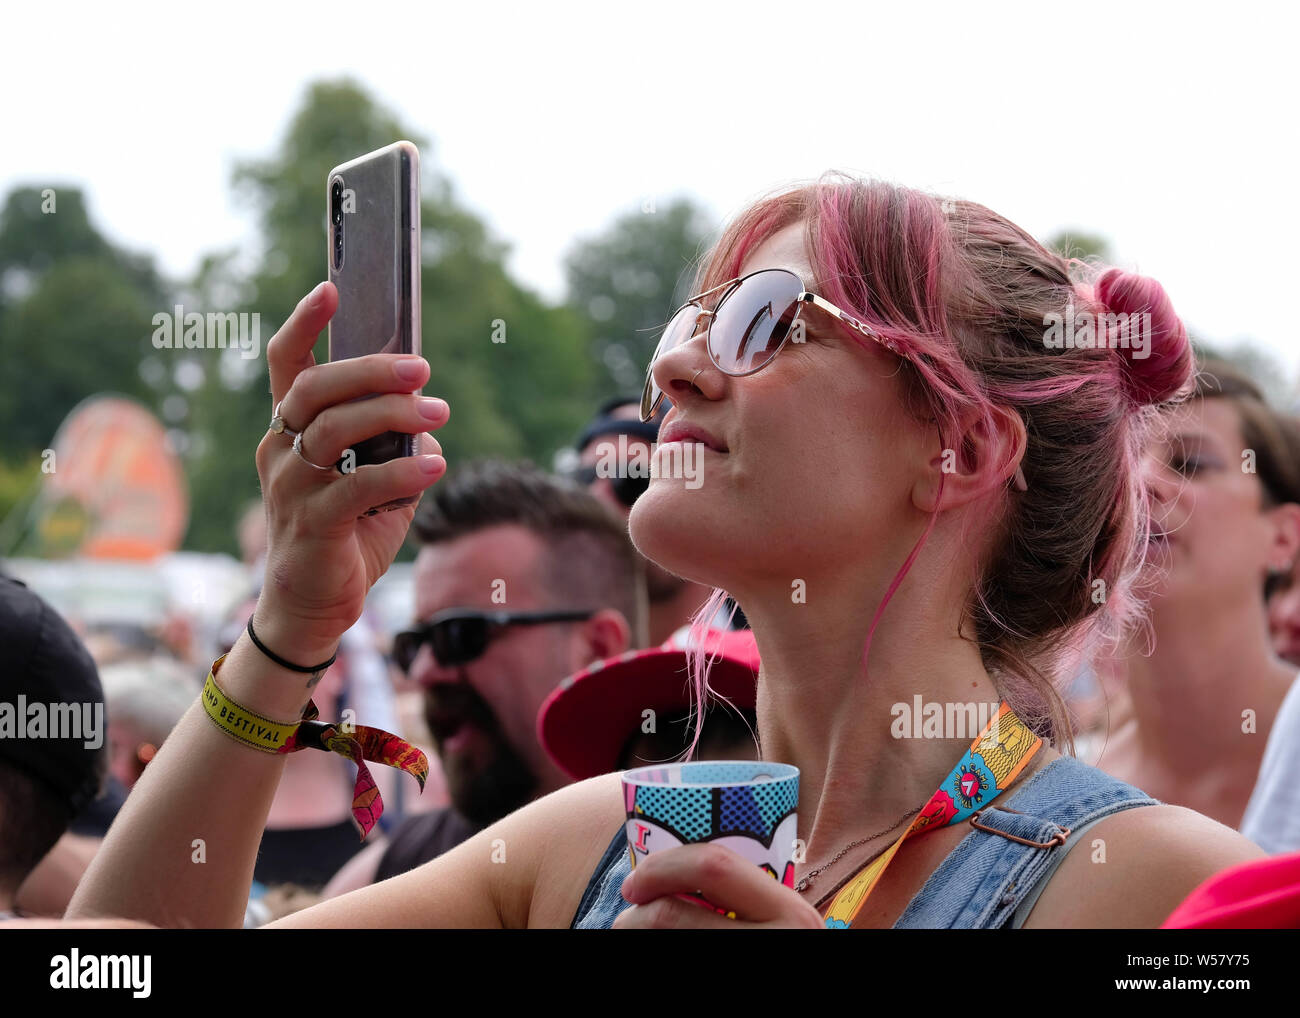 Lulworth, Dorset, July 26th 2019. Woman with dyed red hair in crowd watching acts on stage through her phone, Lulworth, Dorset UK Credit: Dawn Fletcher-Park/Alamy Live News Stock Photo